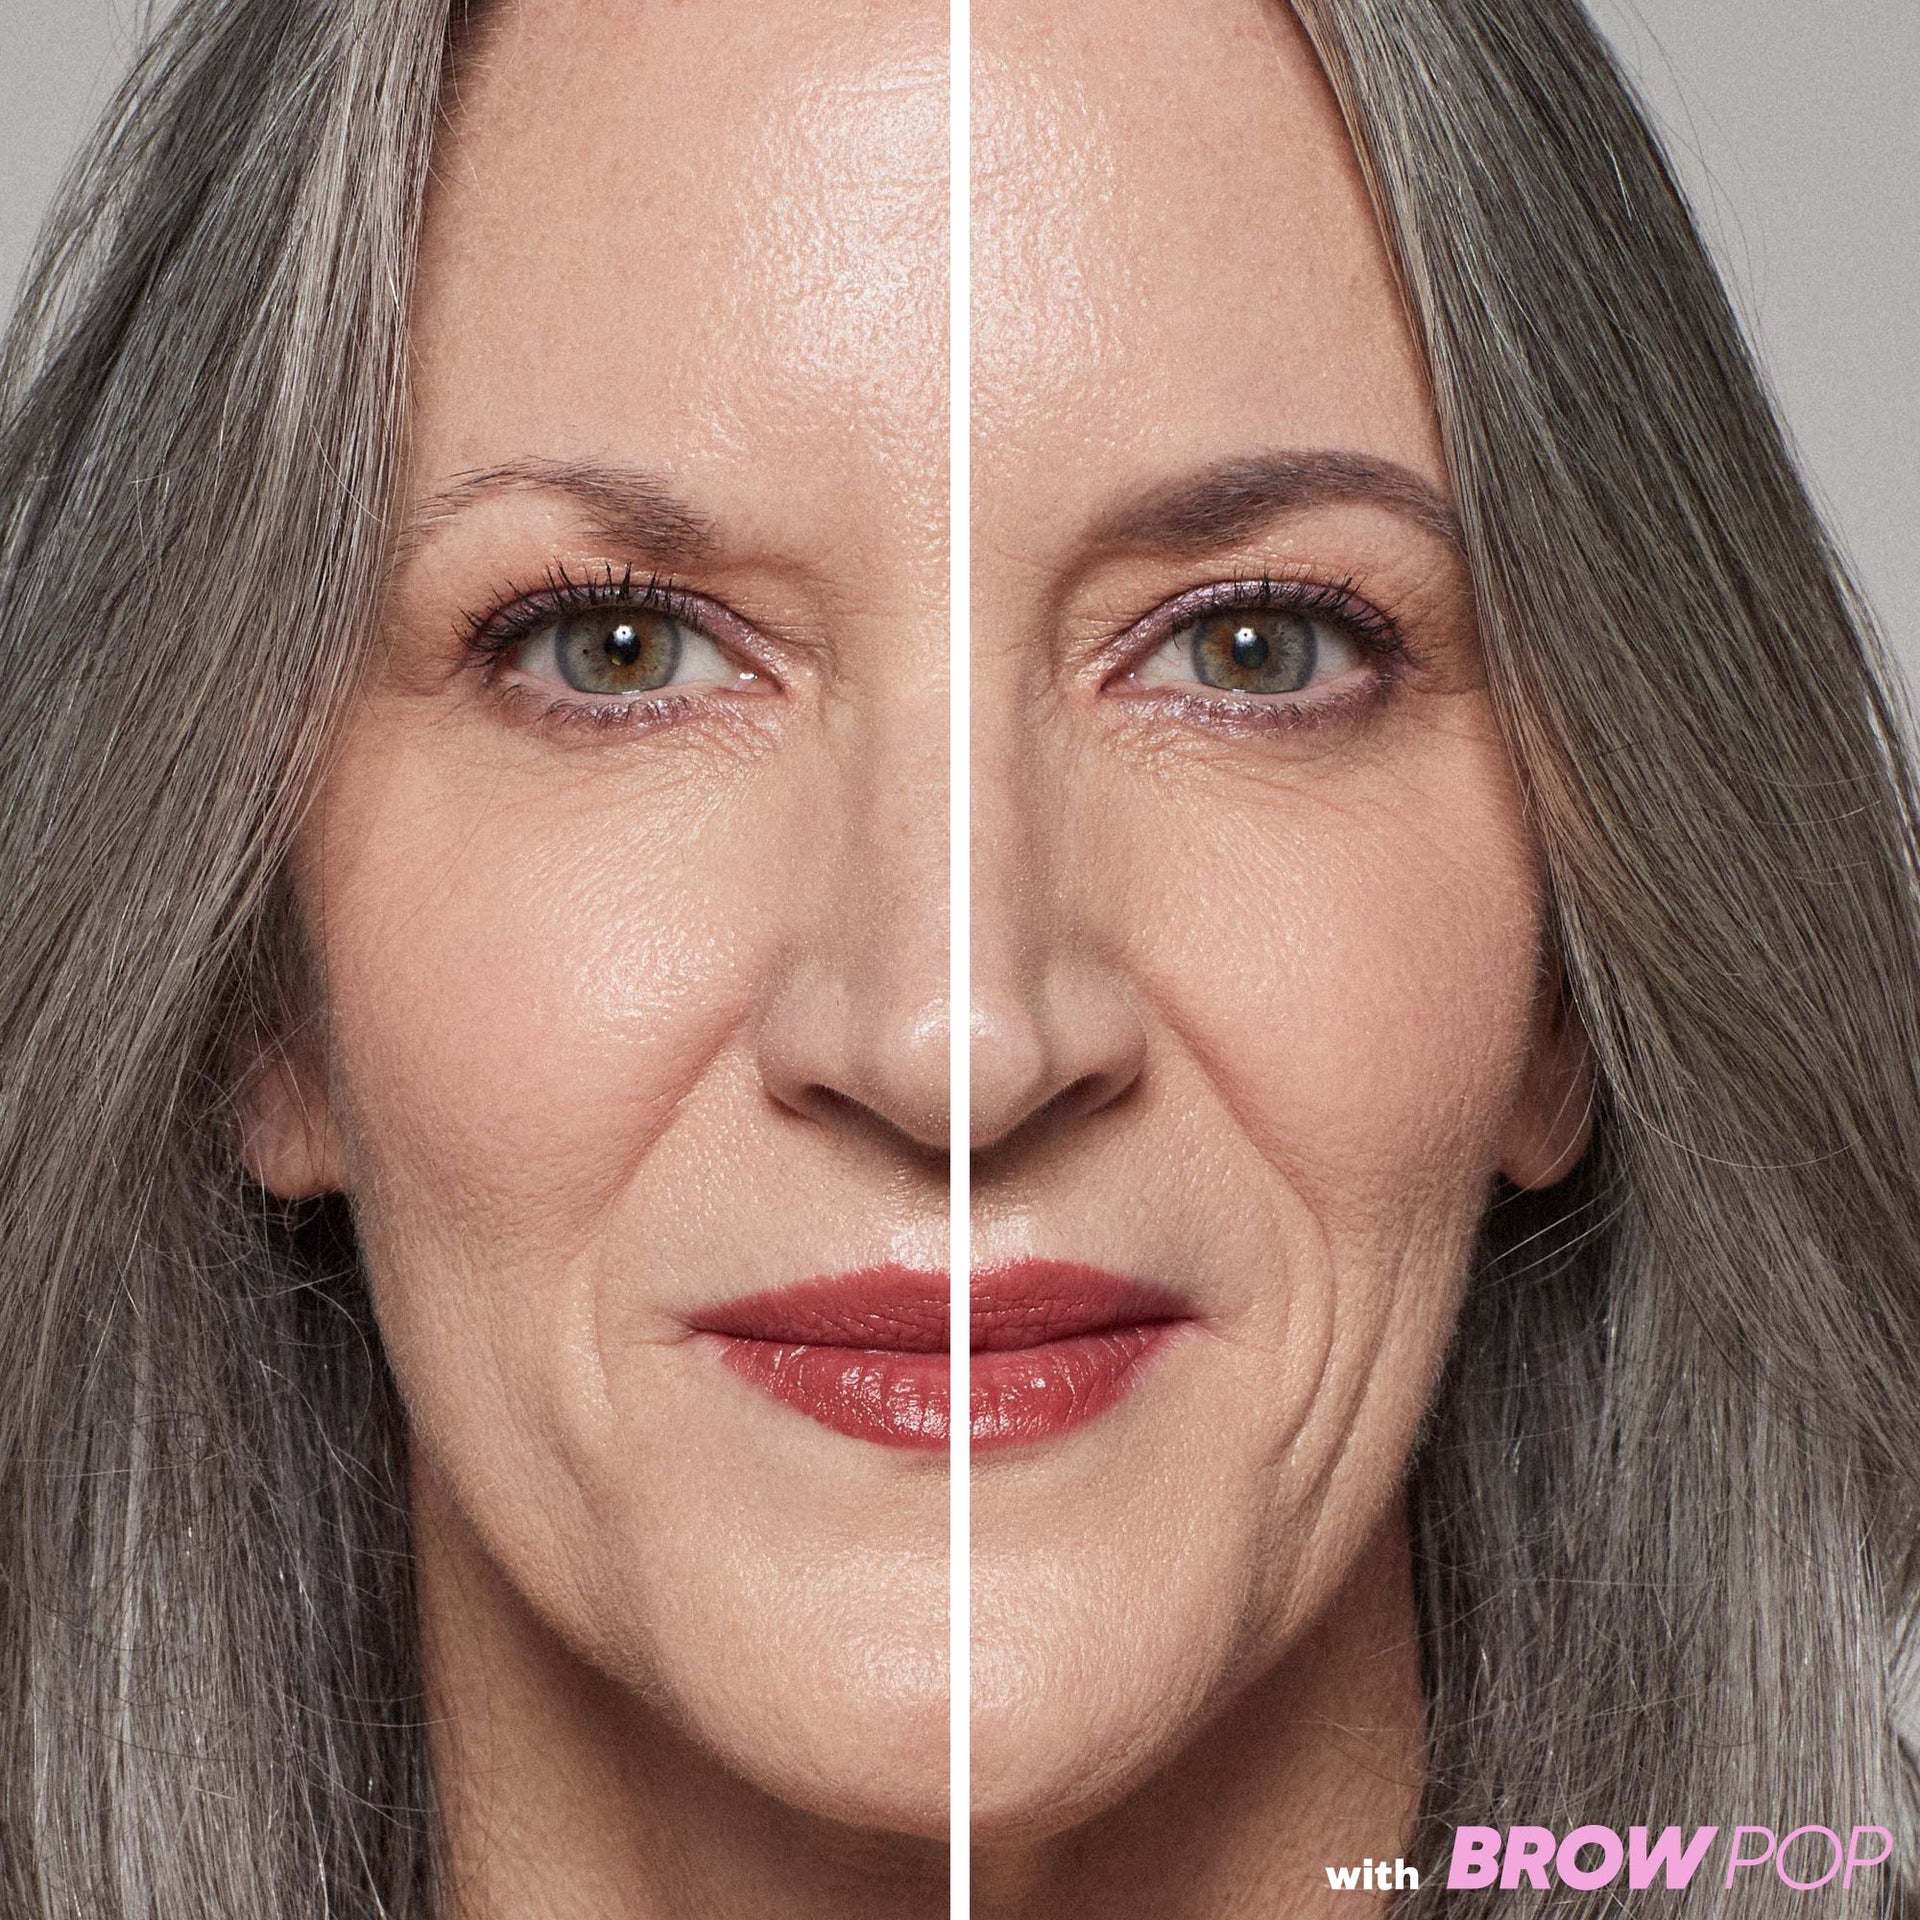 Before and after application of 'Grey' Brow Pop shade.